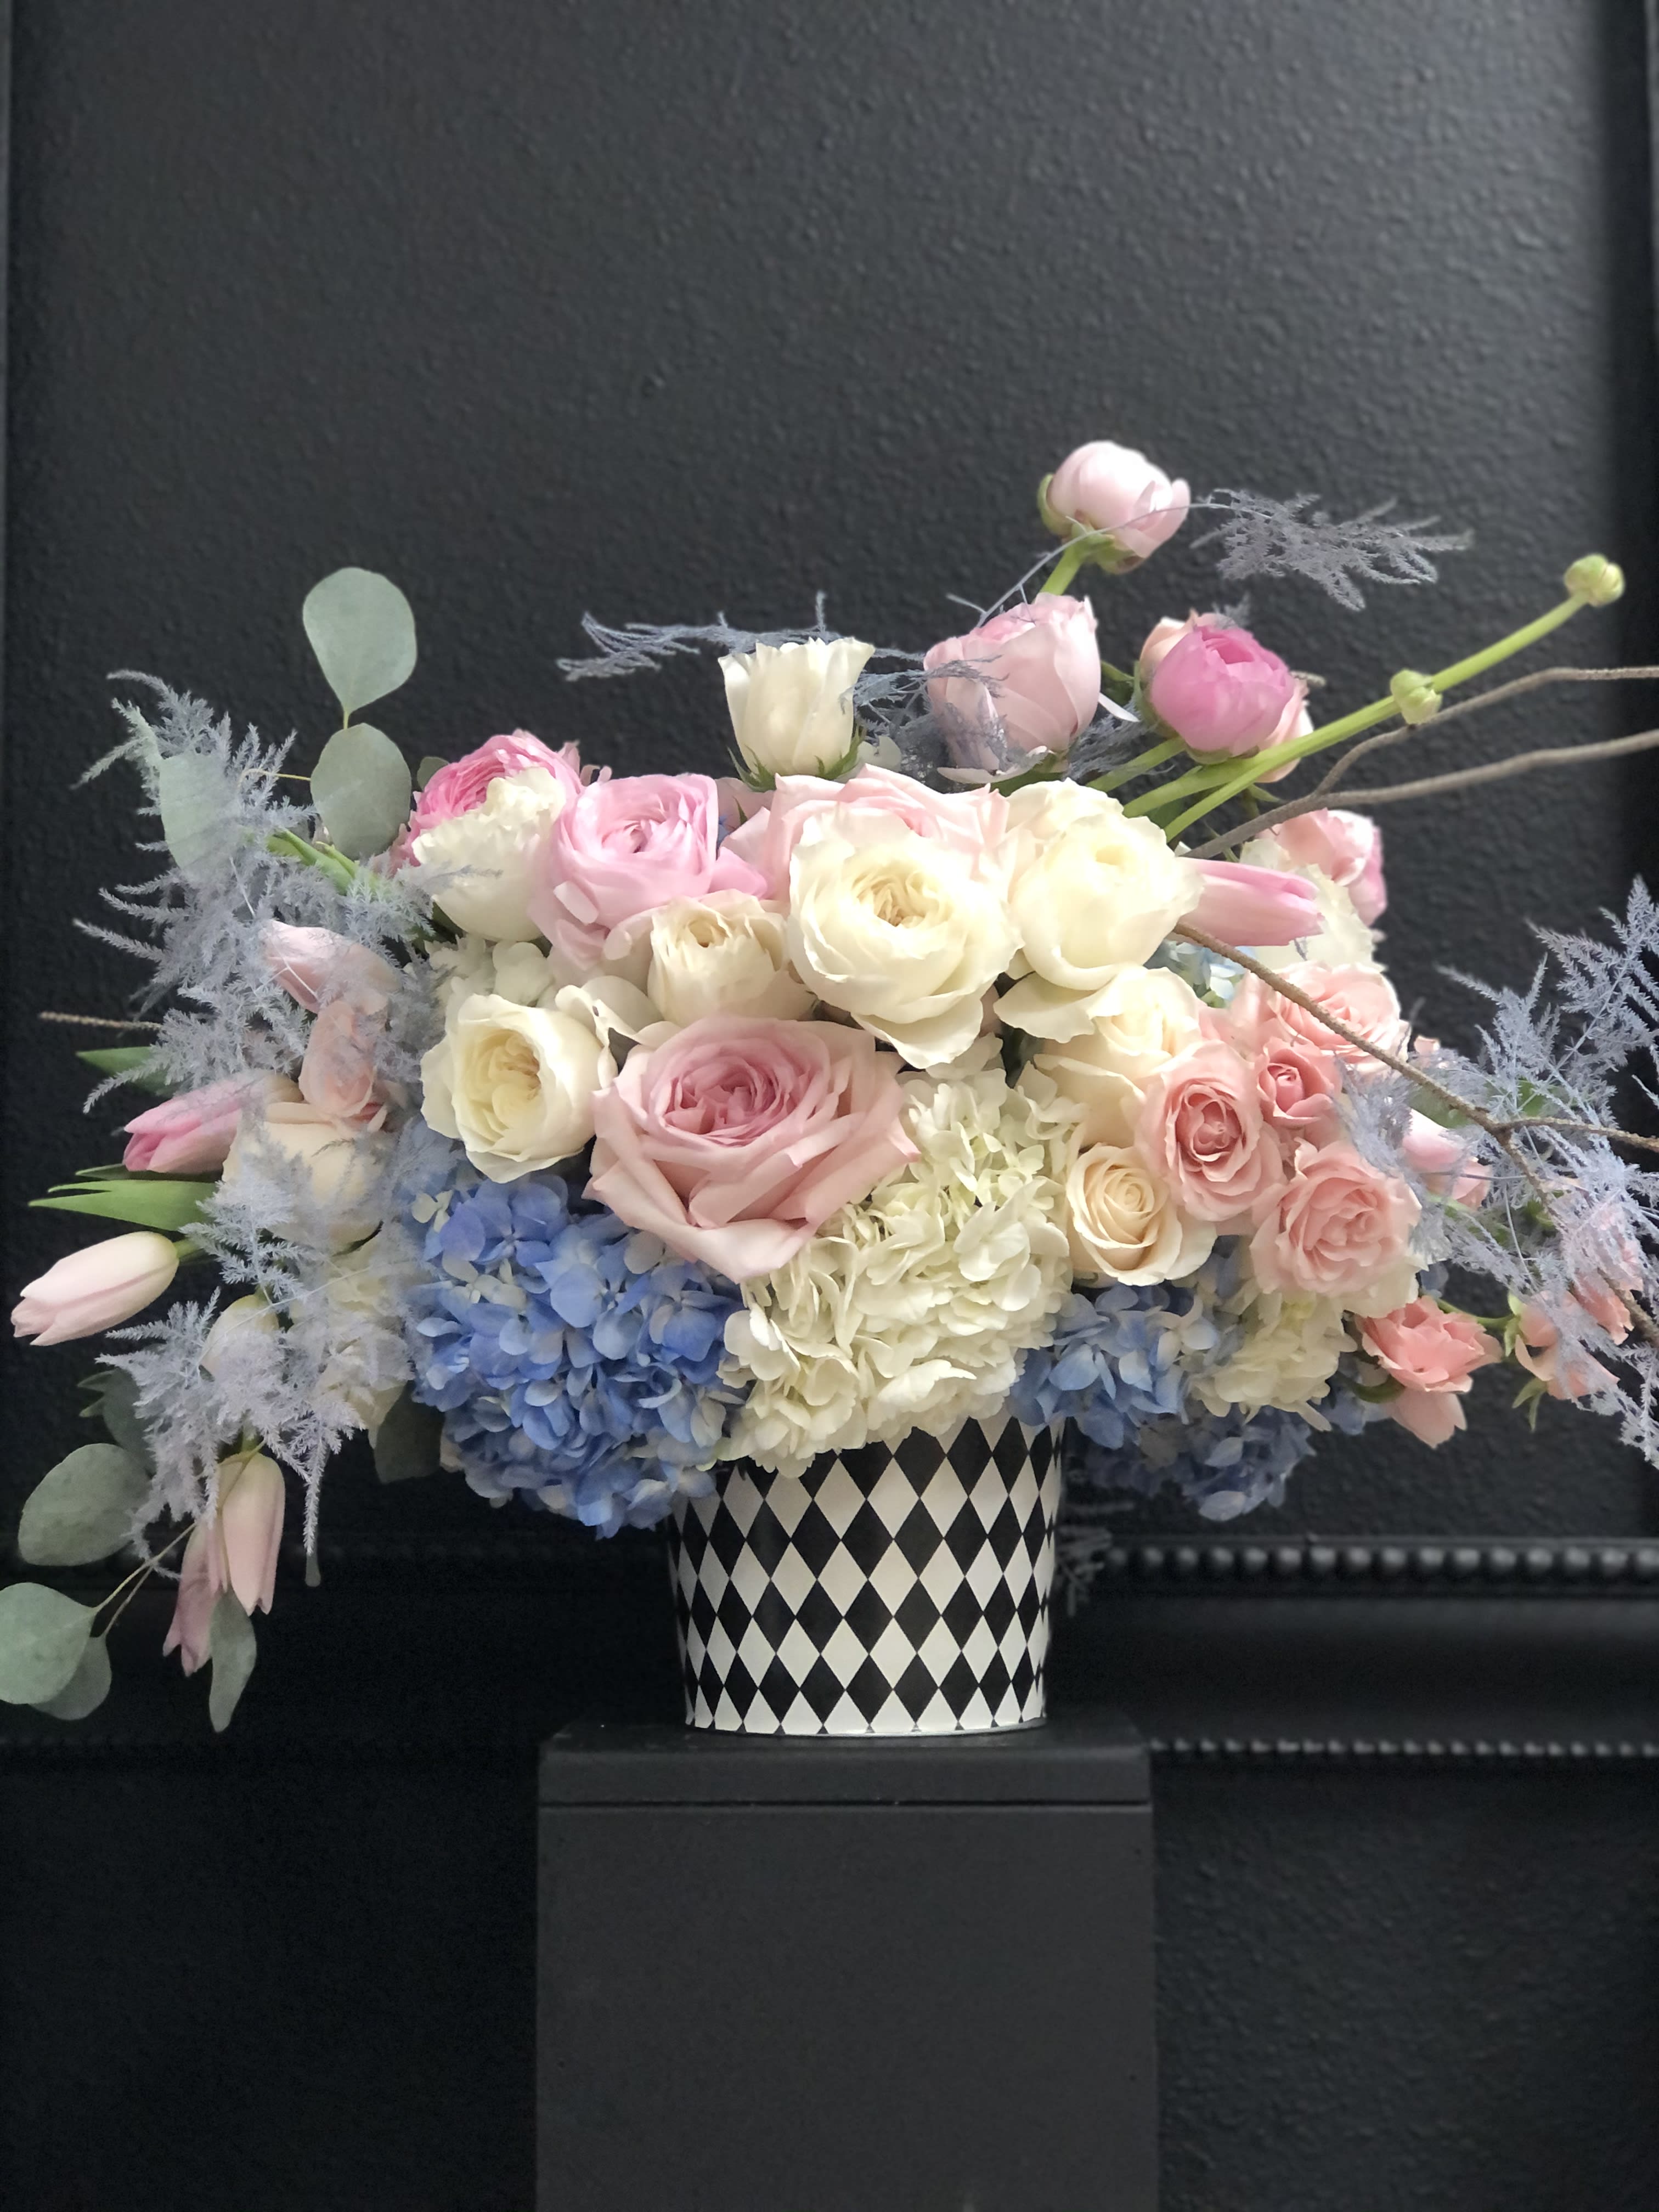 France - Pink and blue flowers mixed with white in whimsical  black and white  container. Delightful arrangement for newborn babies, gender reveal or just because.